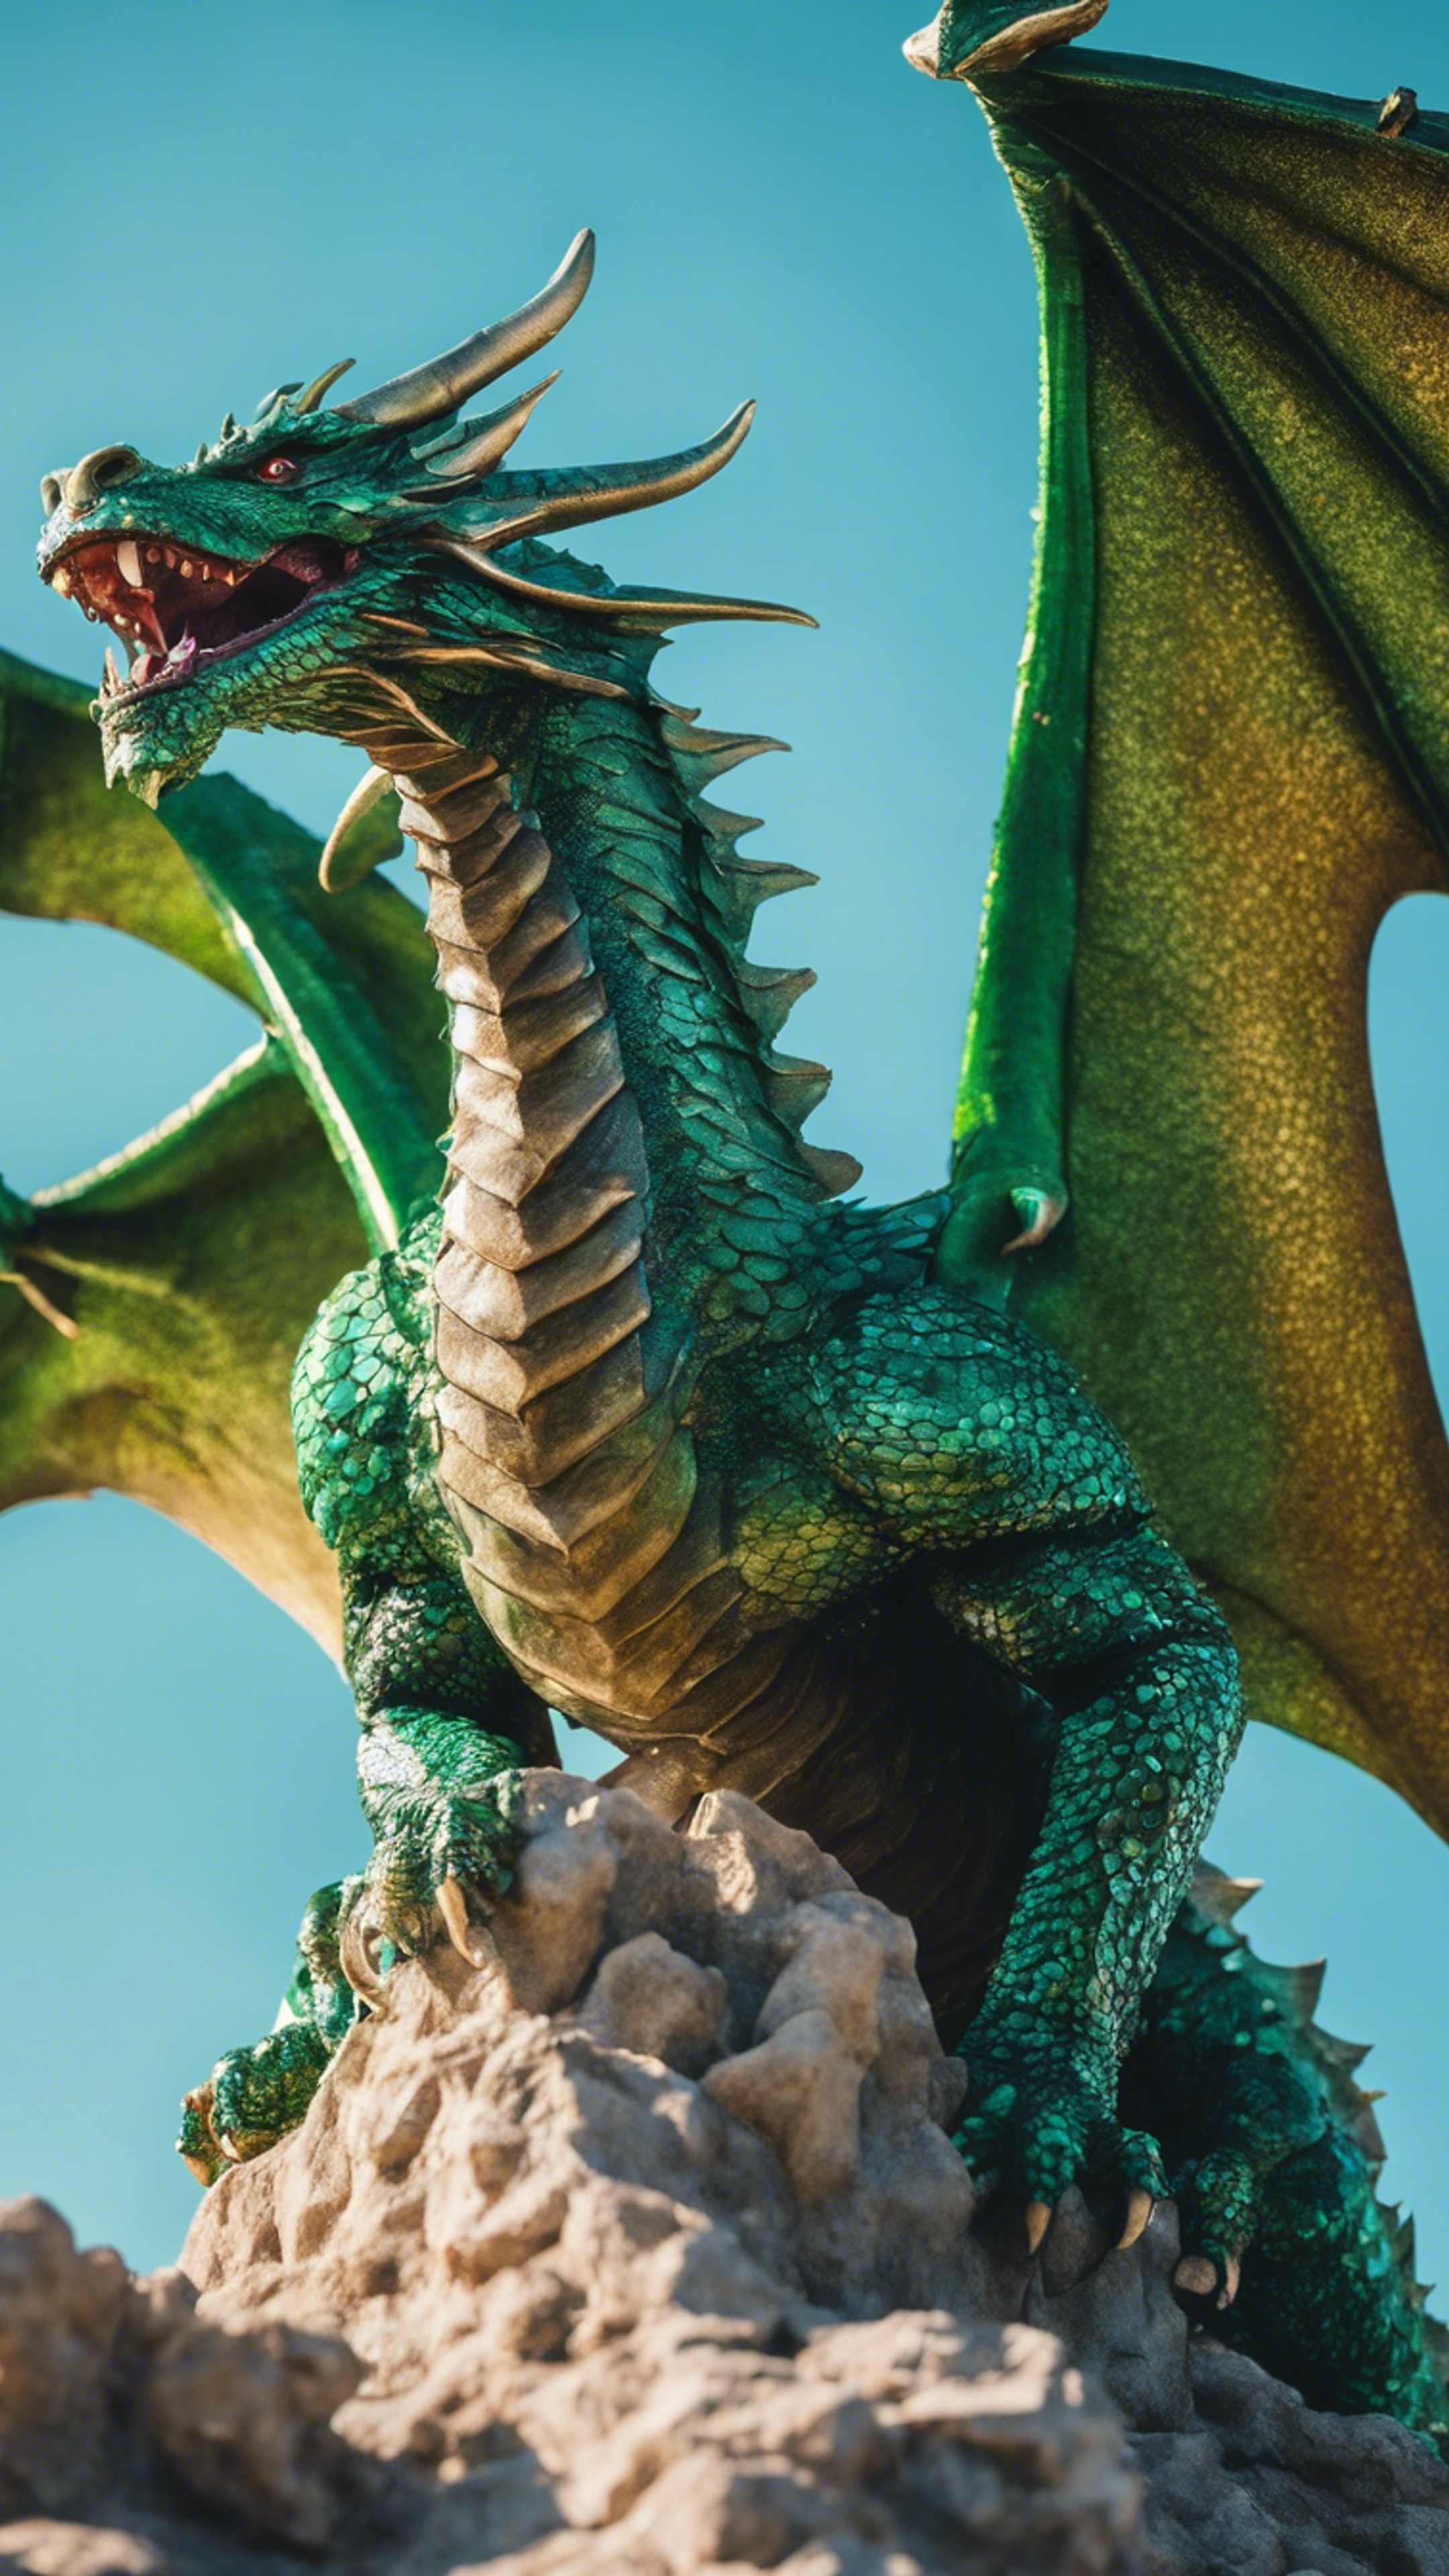 A majestic dragon with emerald green scales soaring in a clear blue sky.壁紙[17ffd7f16aff45c0bffb]